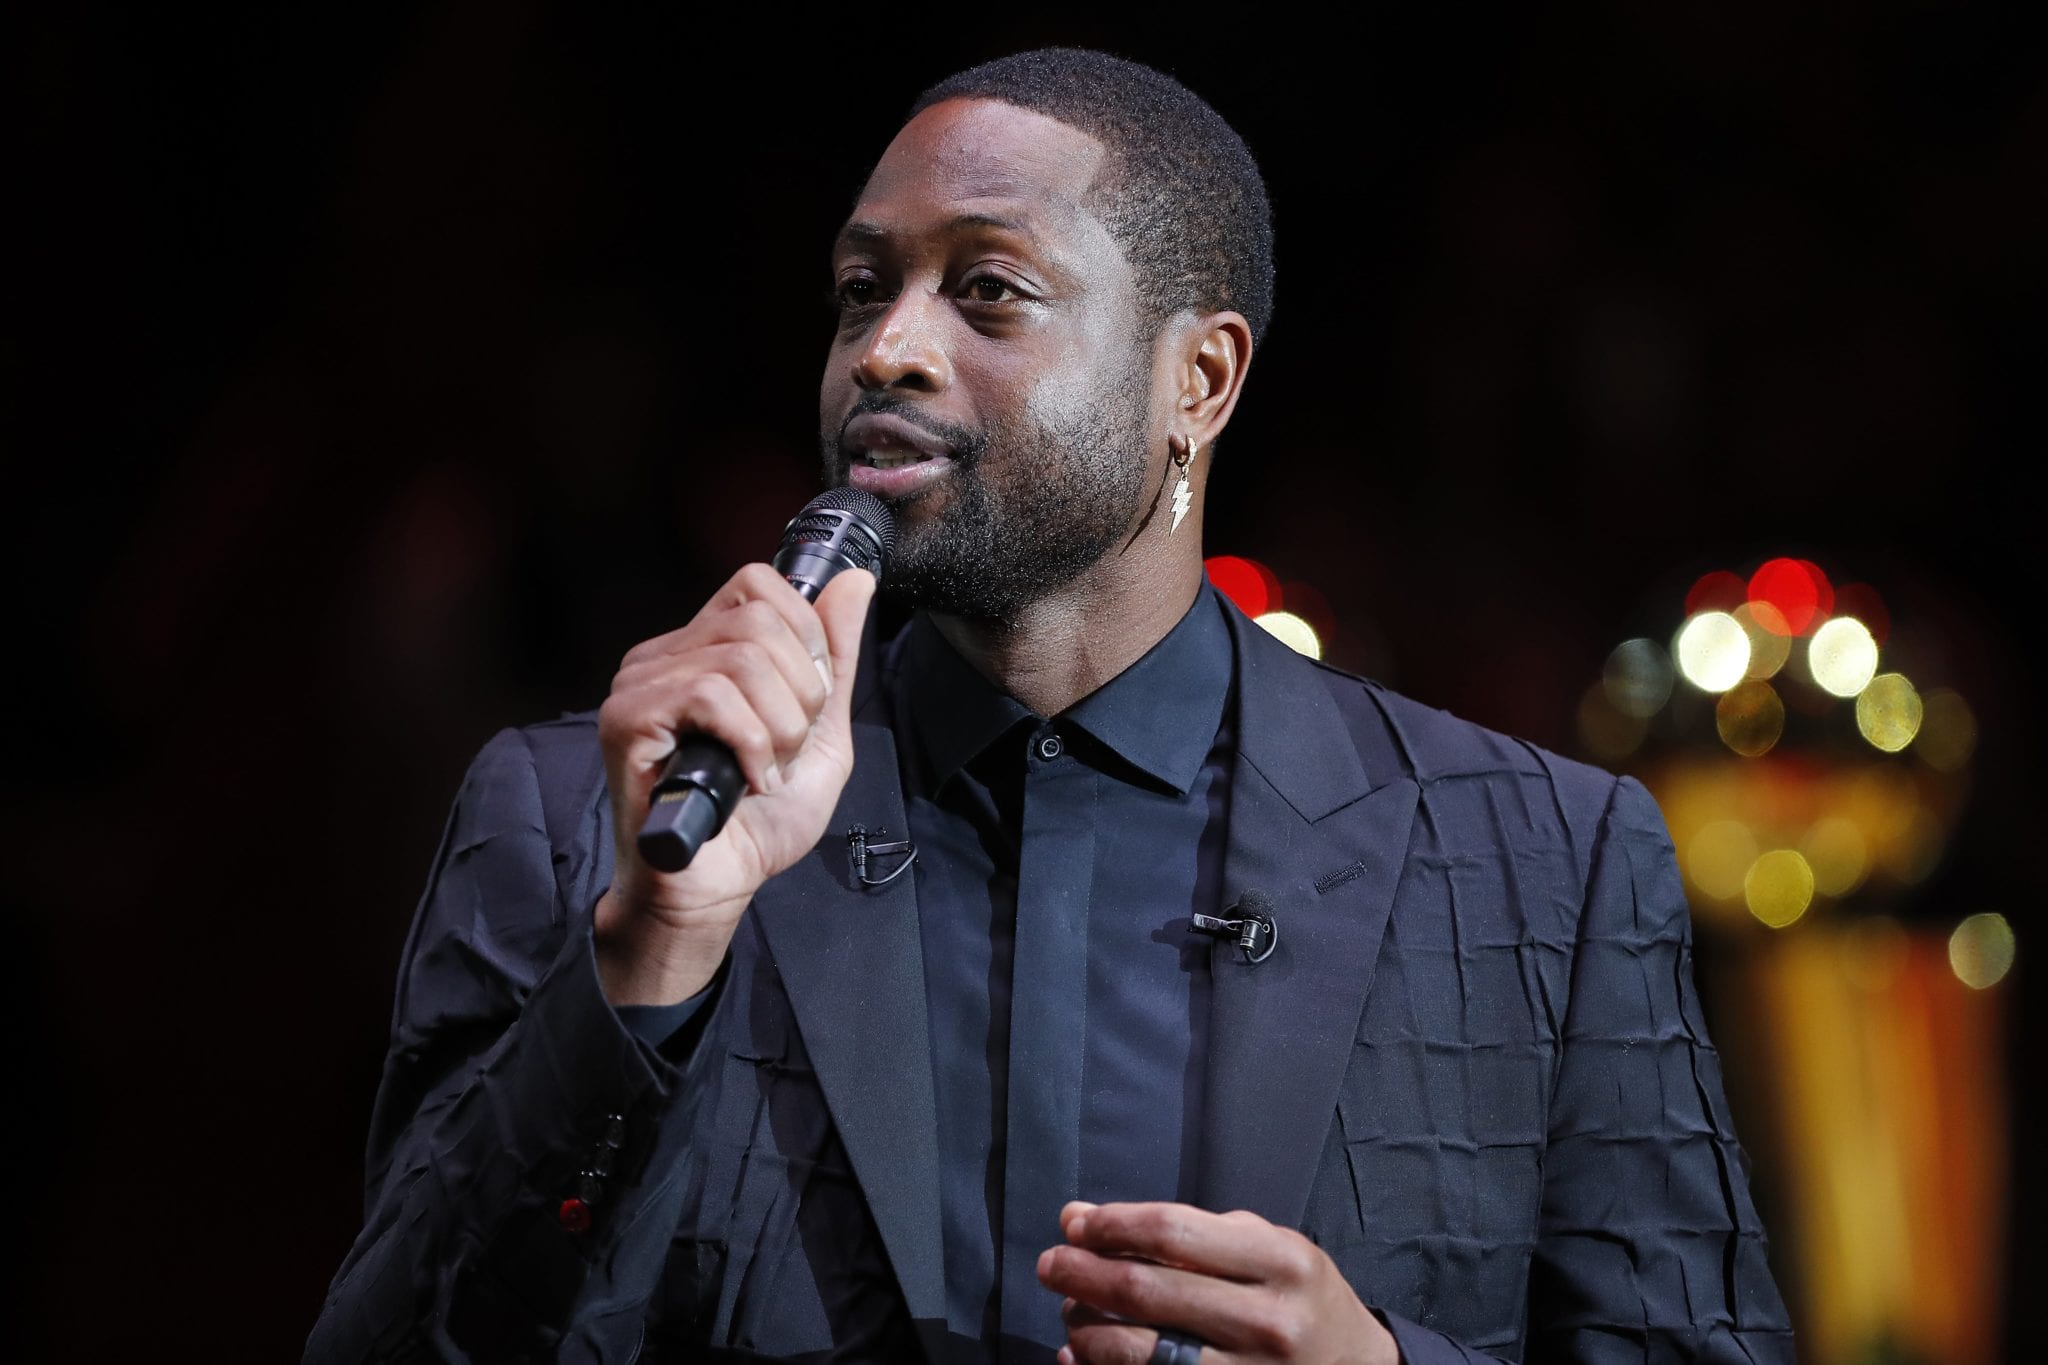 Dwyane Wade On The Most Money He’s Ever Lost And Why It Was All His Teammates’ Fault